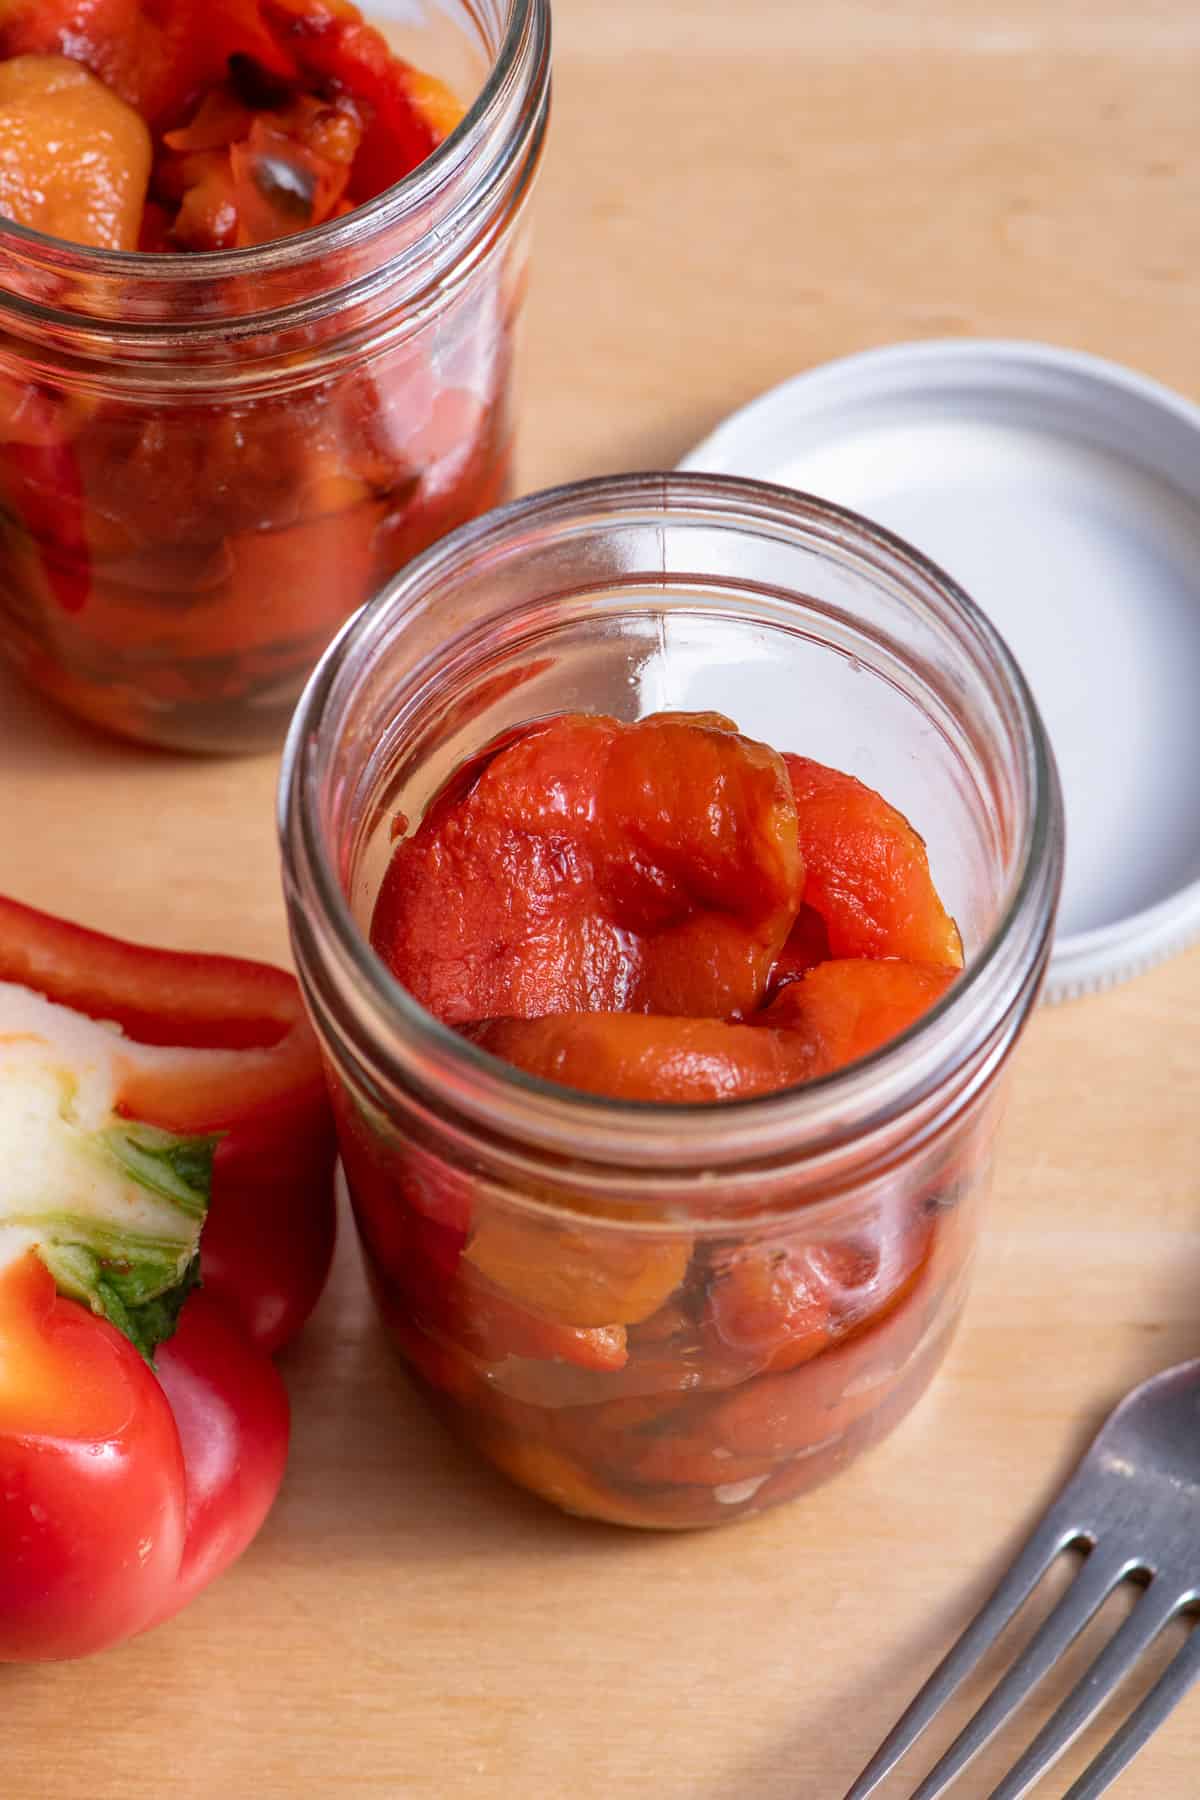 Roasted red bell peppers in glass jar